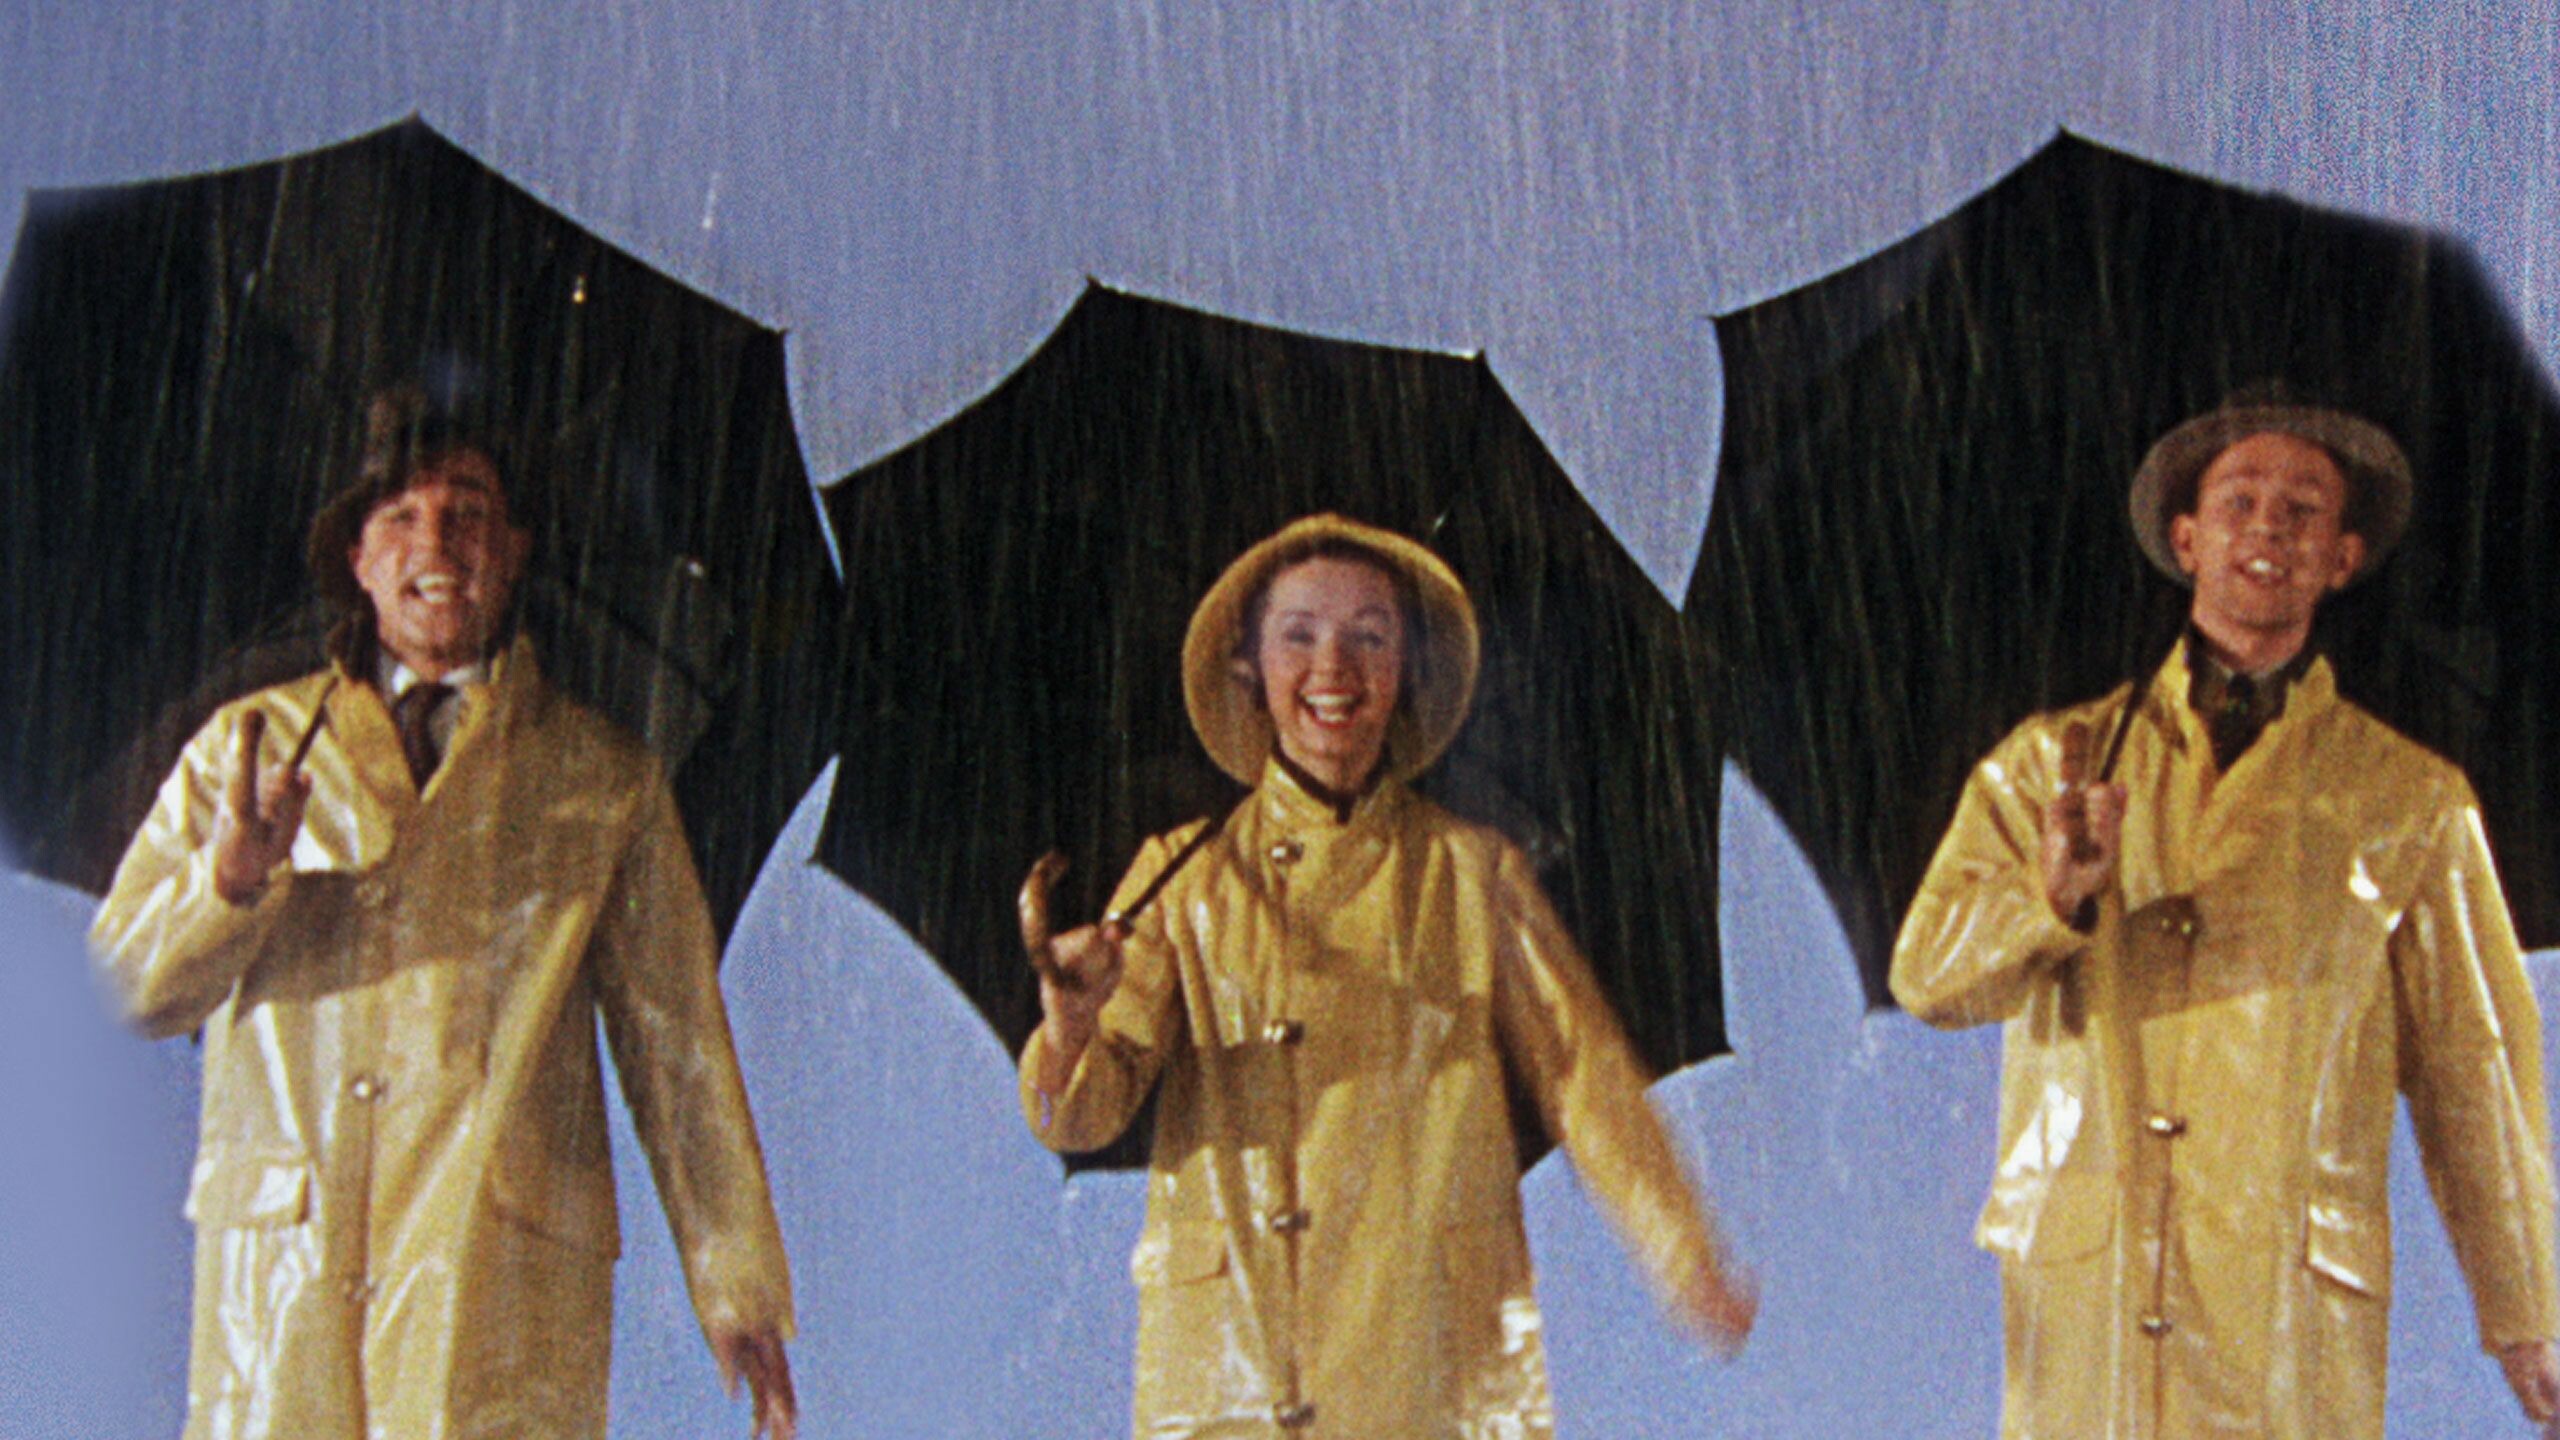 Singin' in the Rain: Donald (Don) Lockwood, Cosmo Brown, and Kathy Selden. 2560x1440 HD Background.